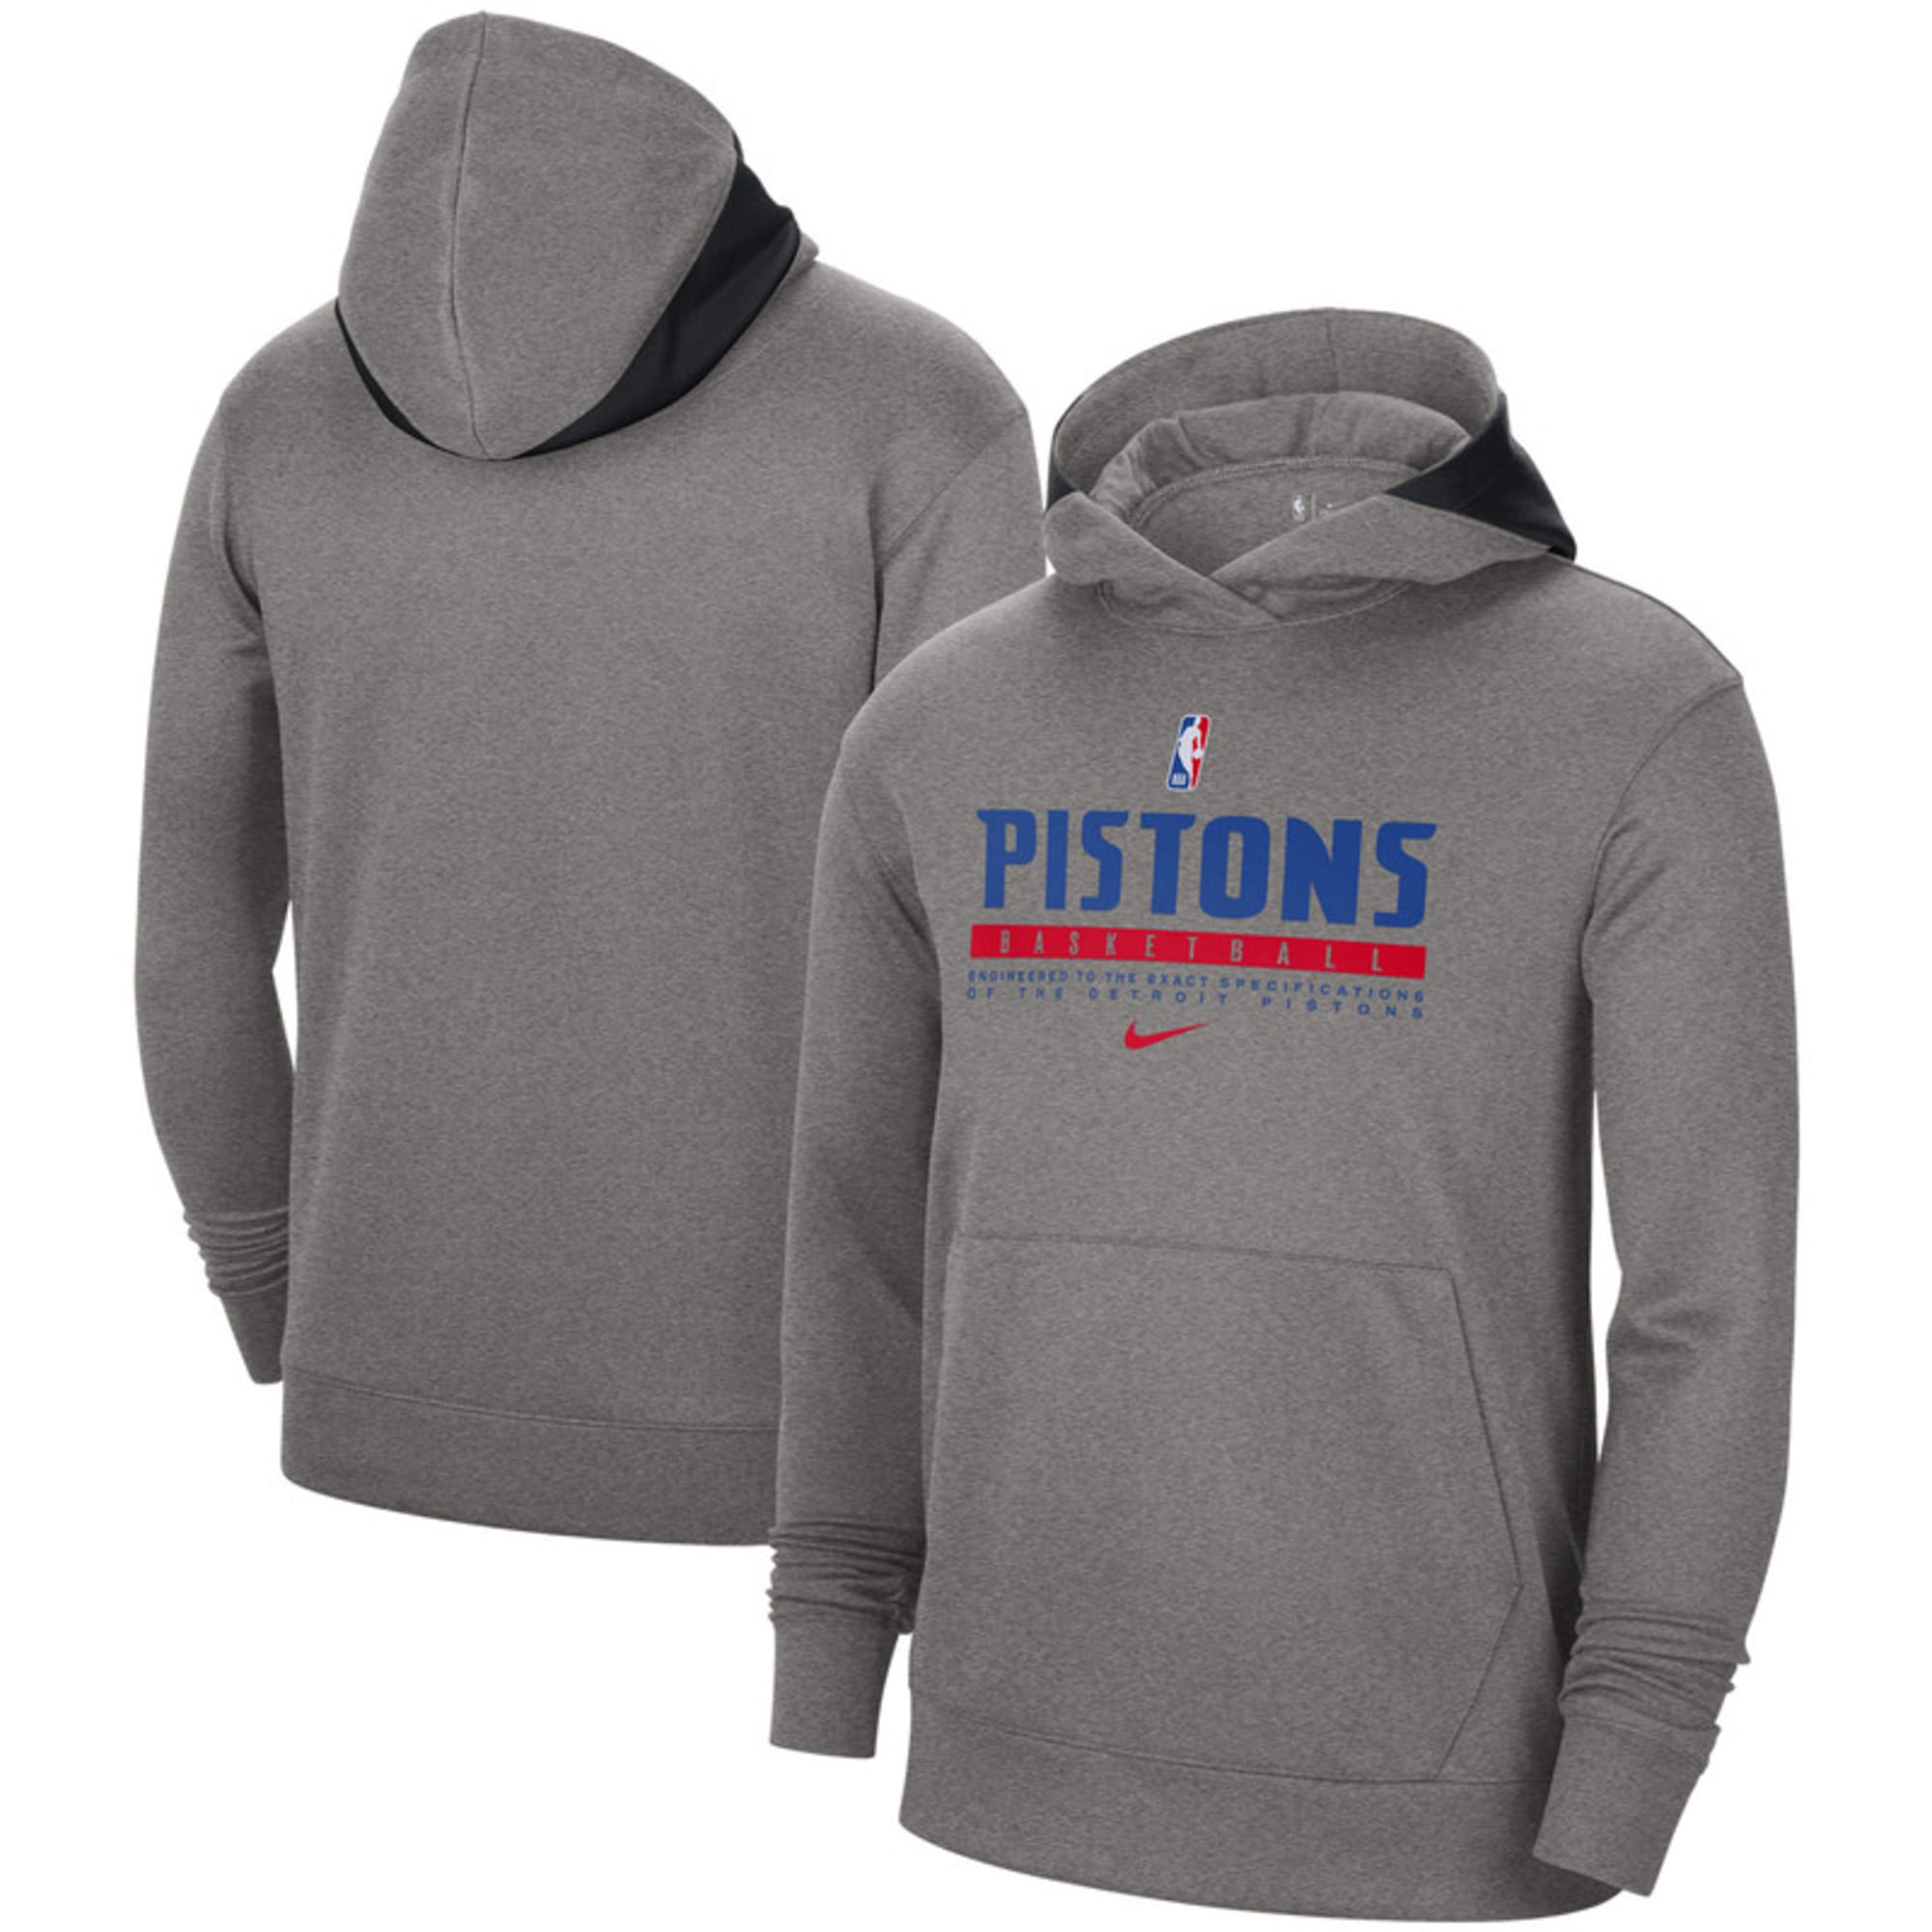 The perfect holiday gifts for the Detroit Pistons fan